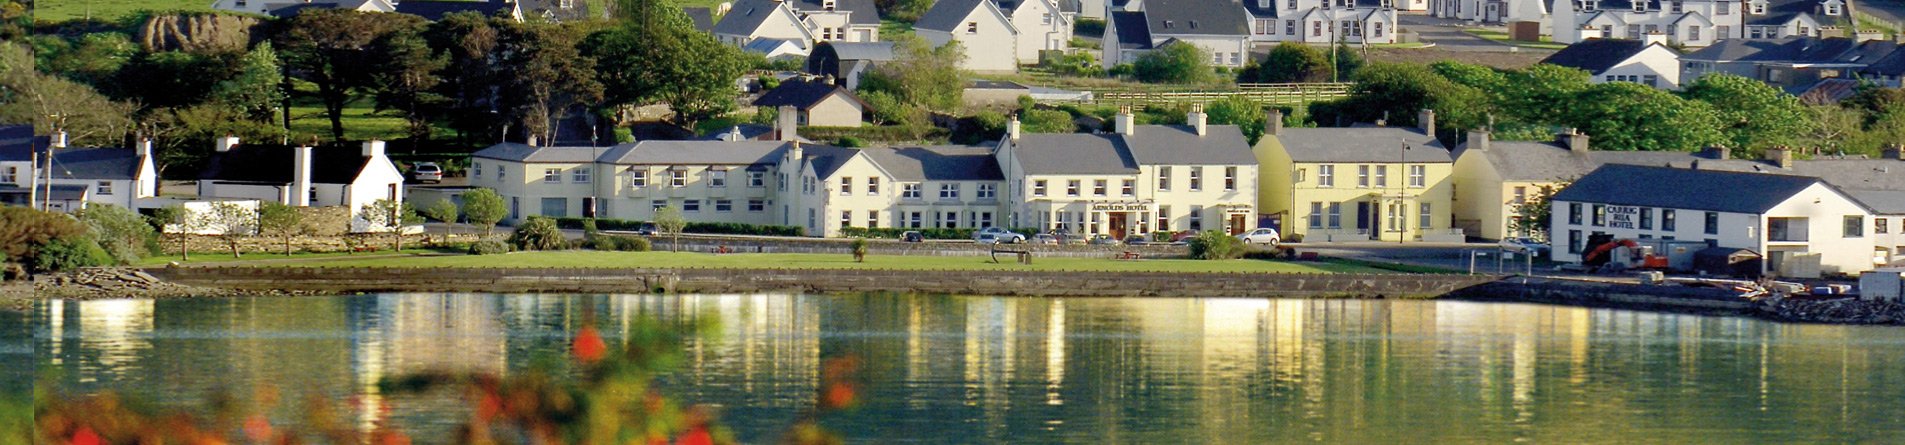 Arnolds Hotel In Dunfanaghy, Donegal 